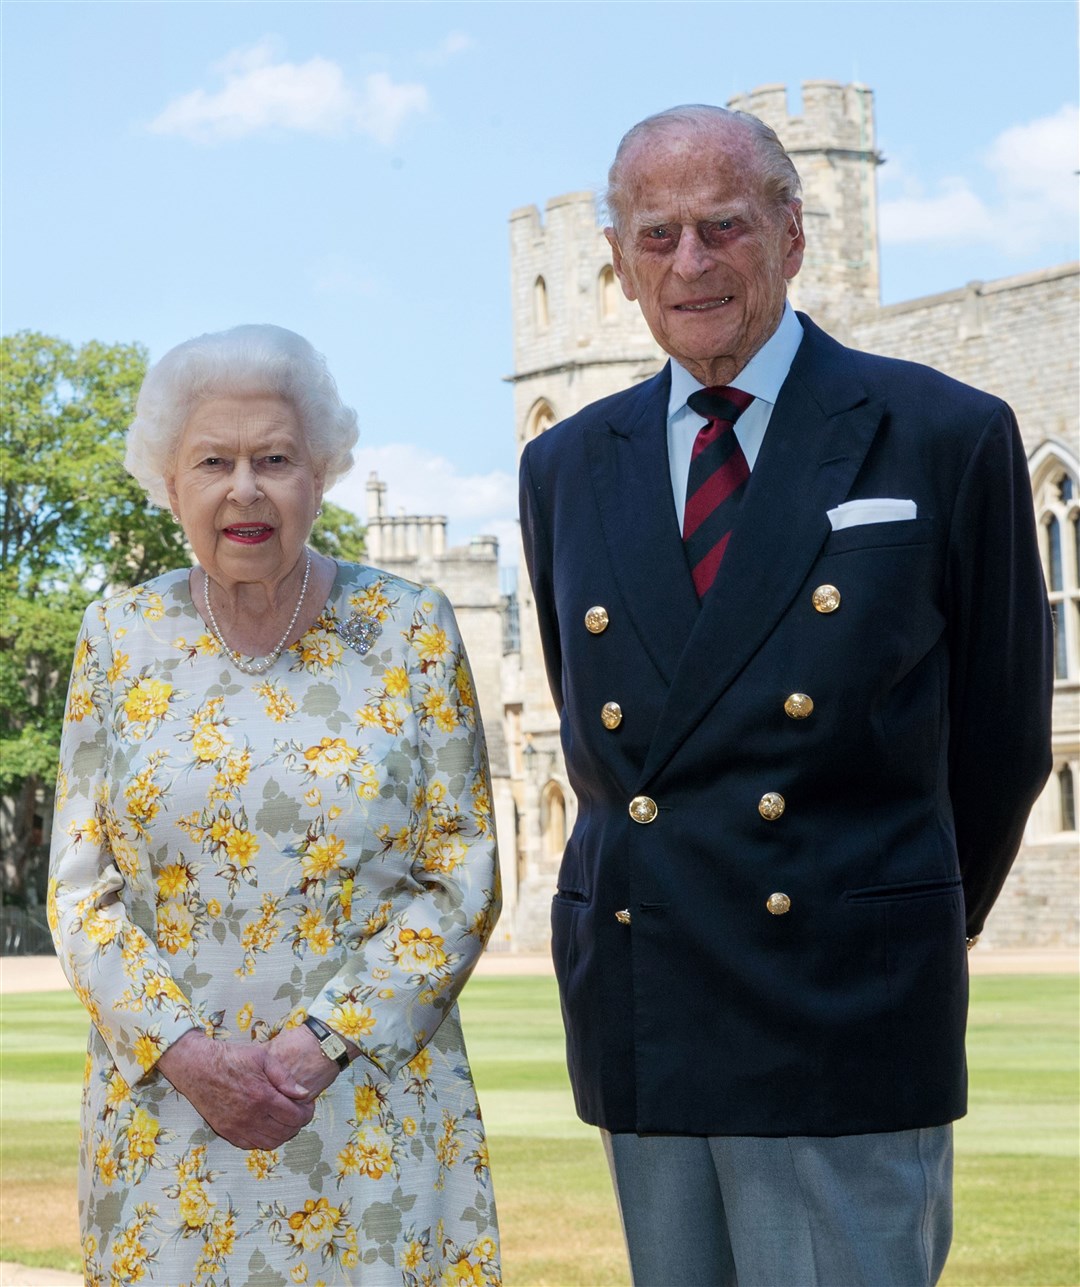 The Queen and the Duke of Edinburgh at Windsor to mark Philip’s 99th birthday (Steven Parsons/PA)